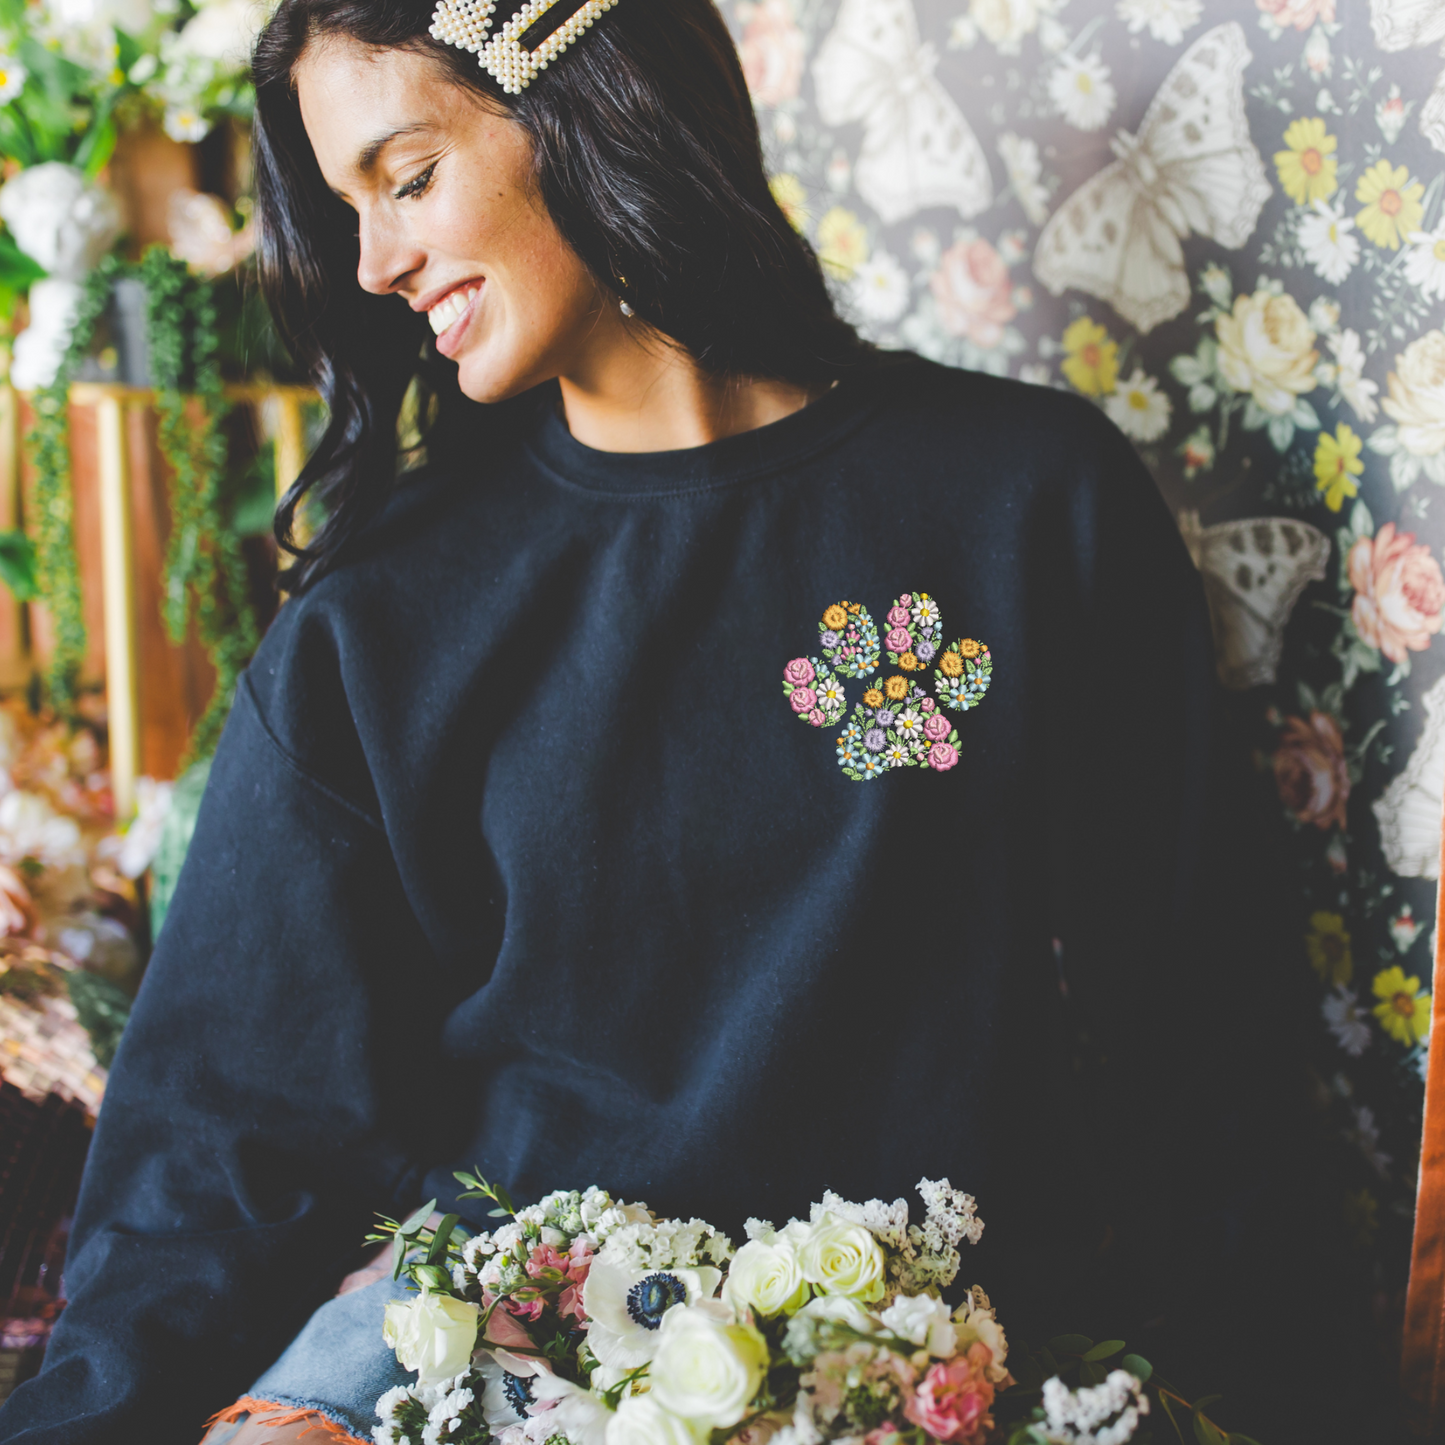 Embroidered Floral Paw Sweatshirt